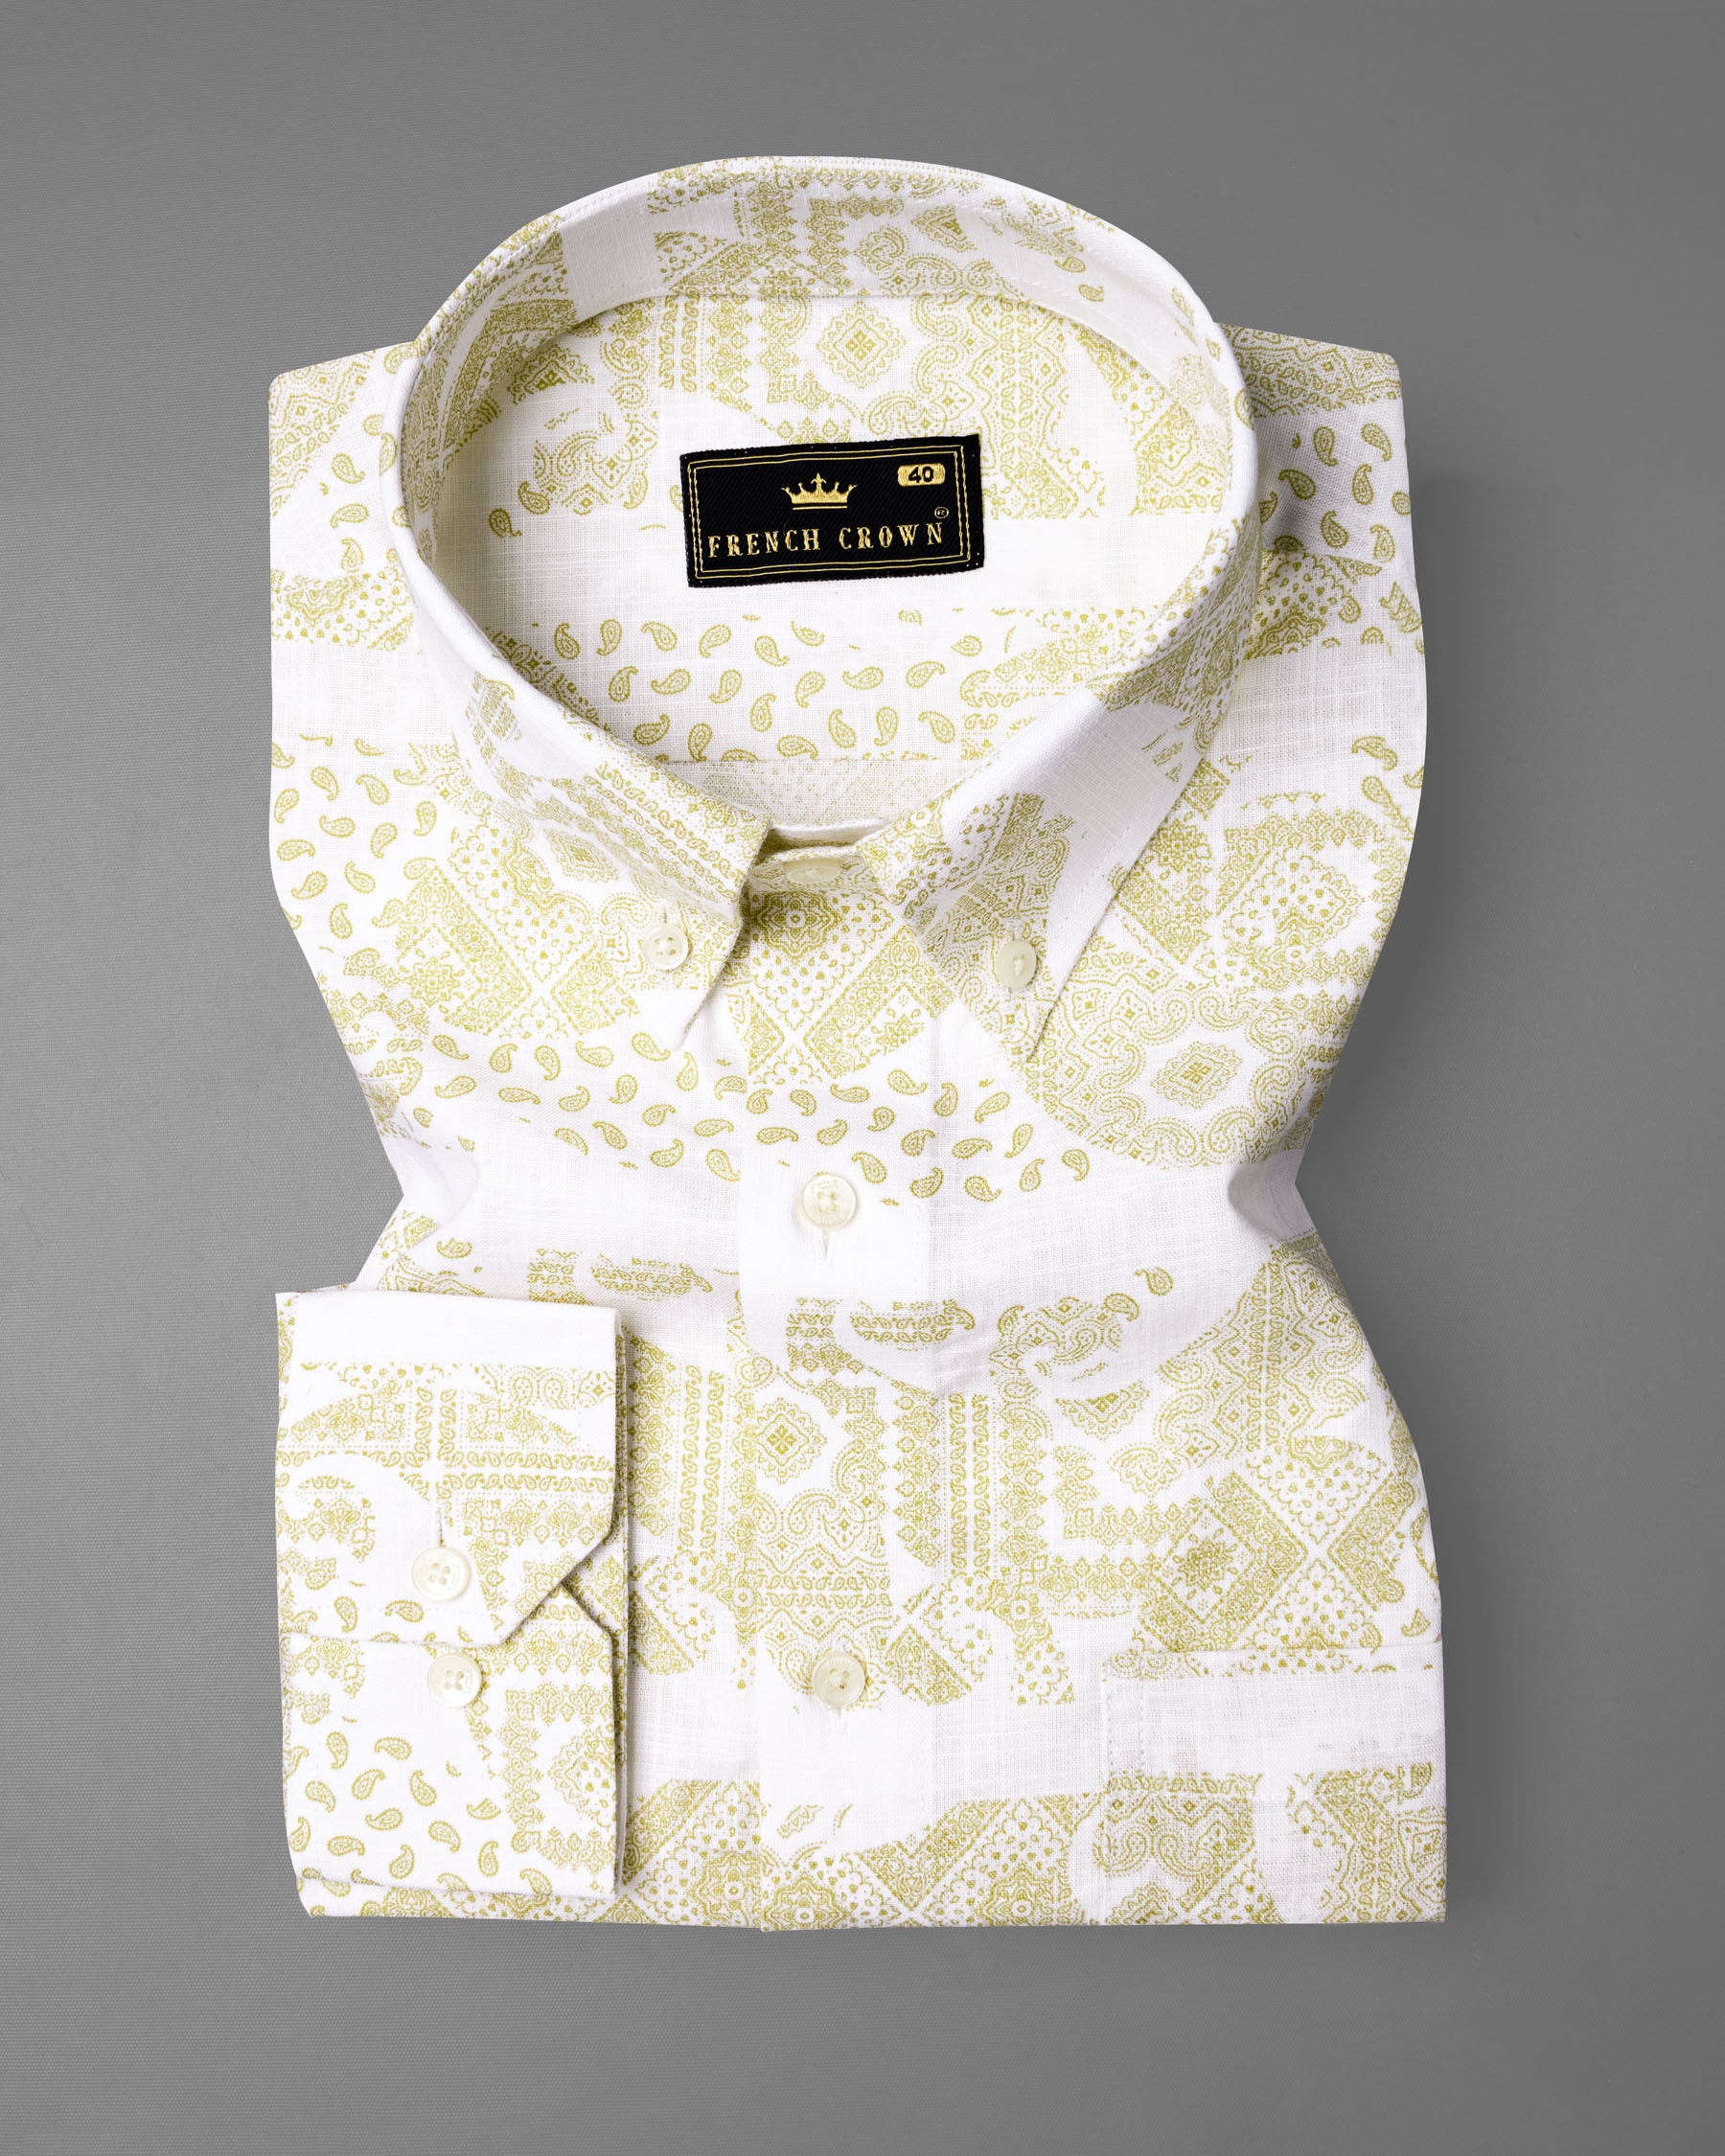 Bright White with Ancient art In spired Print Luxurious Linen Shirt 6948-BD-38,6948-BD-38,6948-BD-39,6948-BD-39,6948-BD-40,6948-BD-40,6948-BD-42,6948-BD-42,6948-BD-44,6948-BD-44,6948-BD-46,6948-BD-46,6948-BD-48,6948-BD-48,6948-BD-50,6948-BD-50,6948-BD-52,6948-BD-52